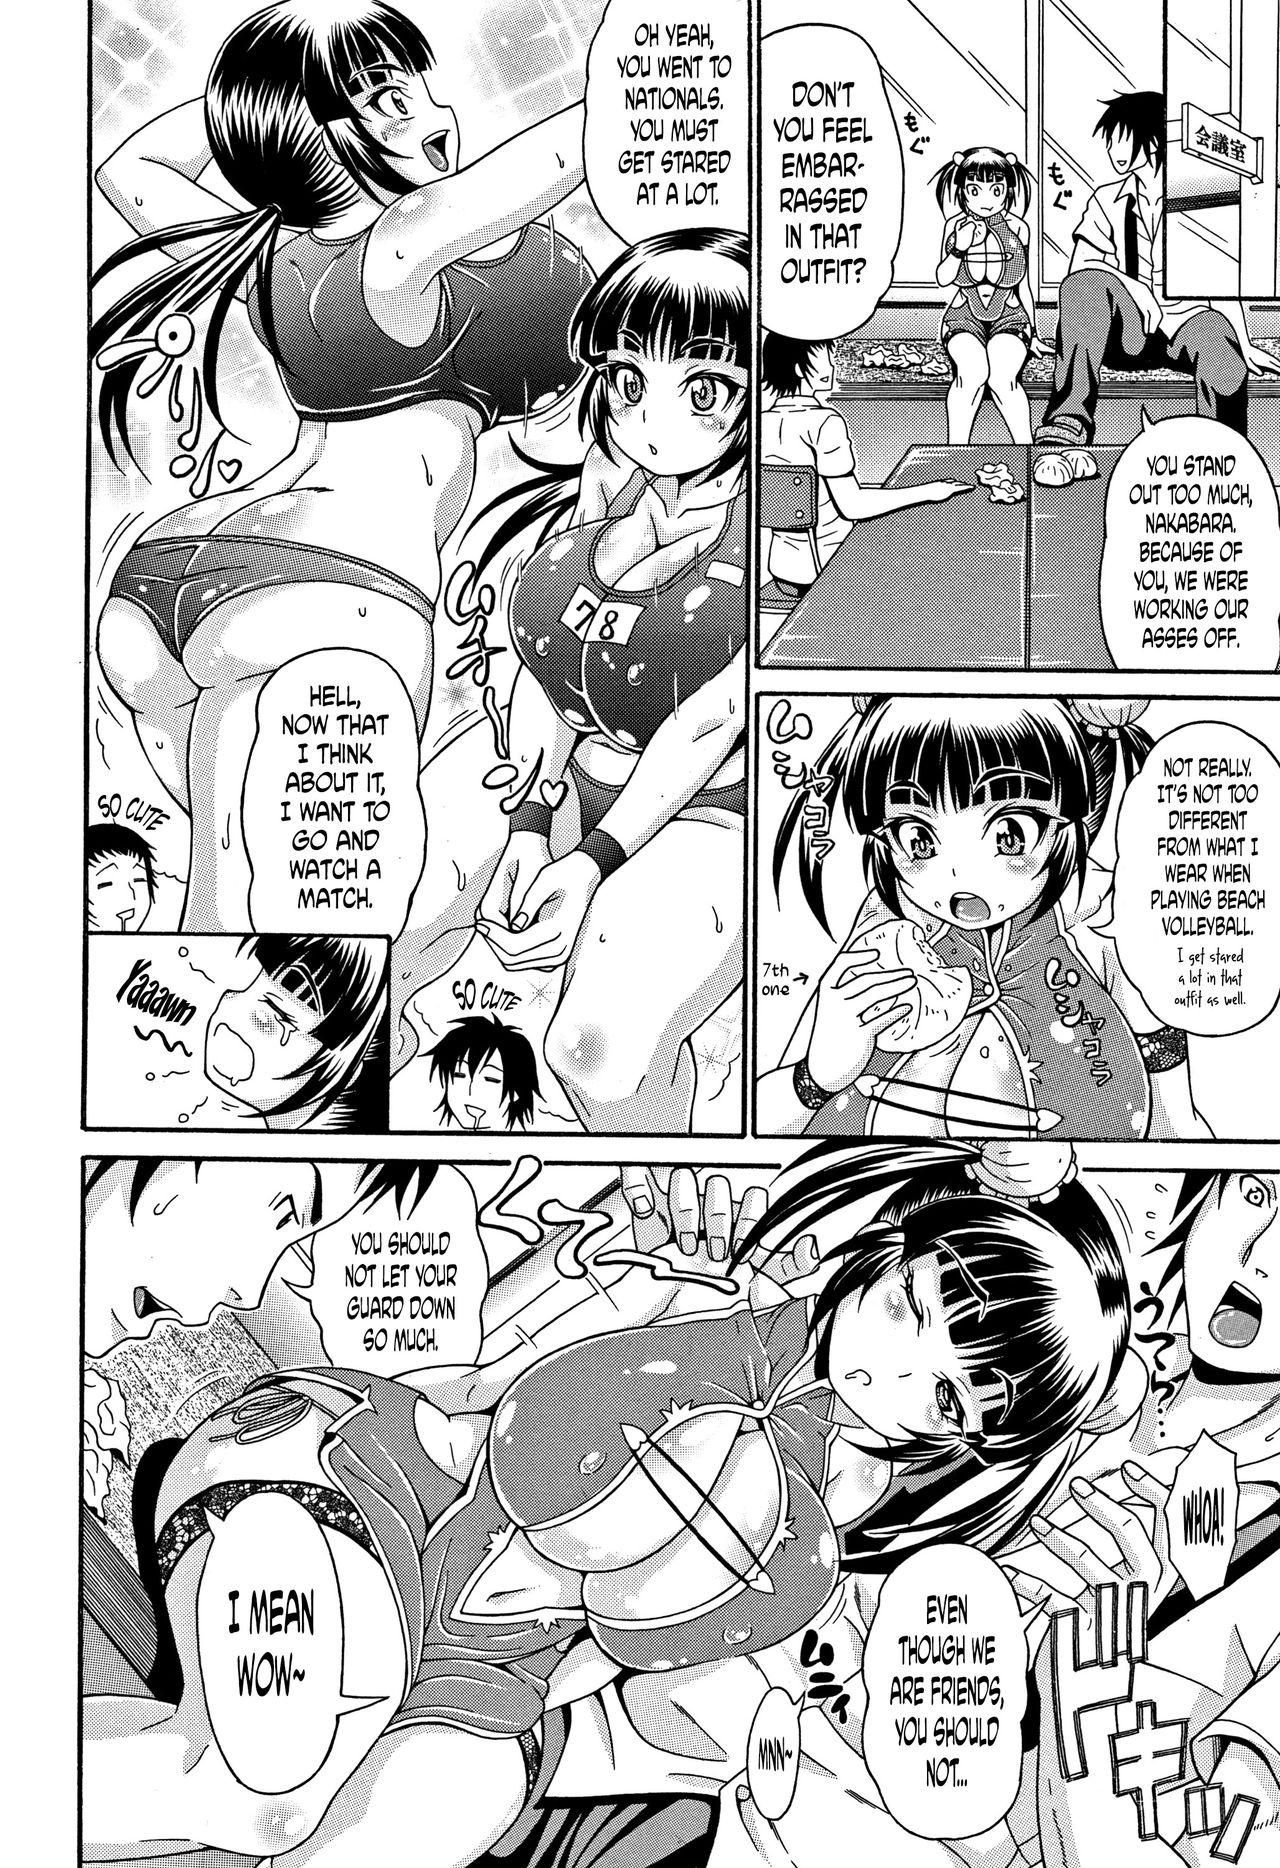 [Andou Hiroyuki] Mamire Chichi - Sticky Tits Feel Hot All Over. Ch.1-10 [English] [doujin-moe.us] 92